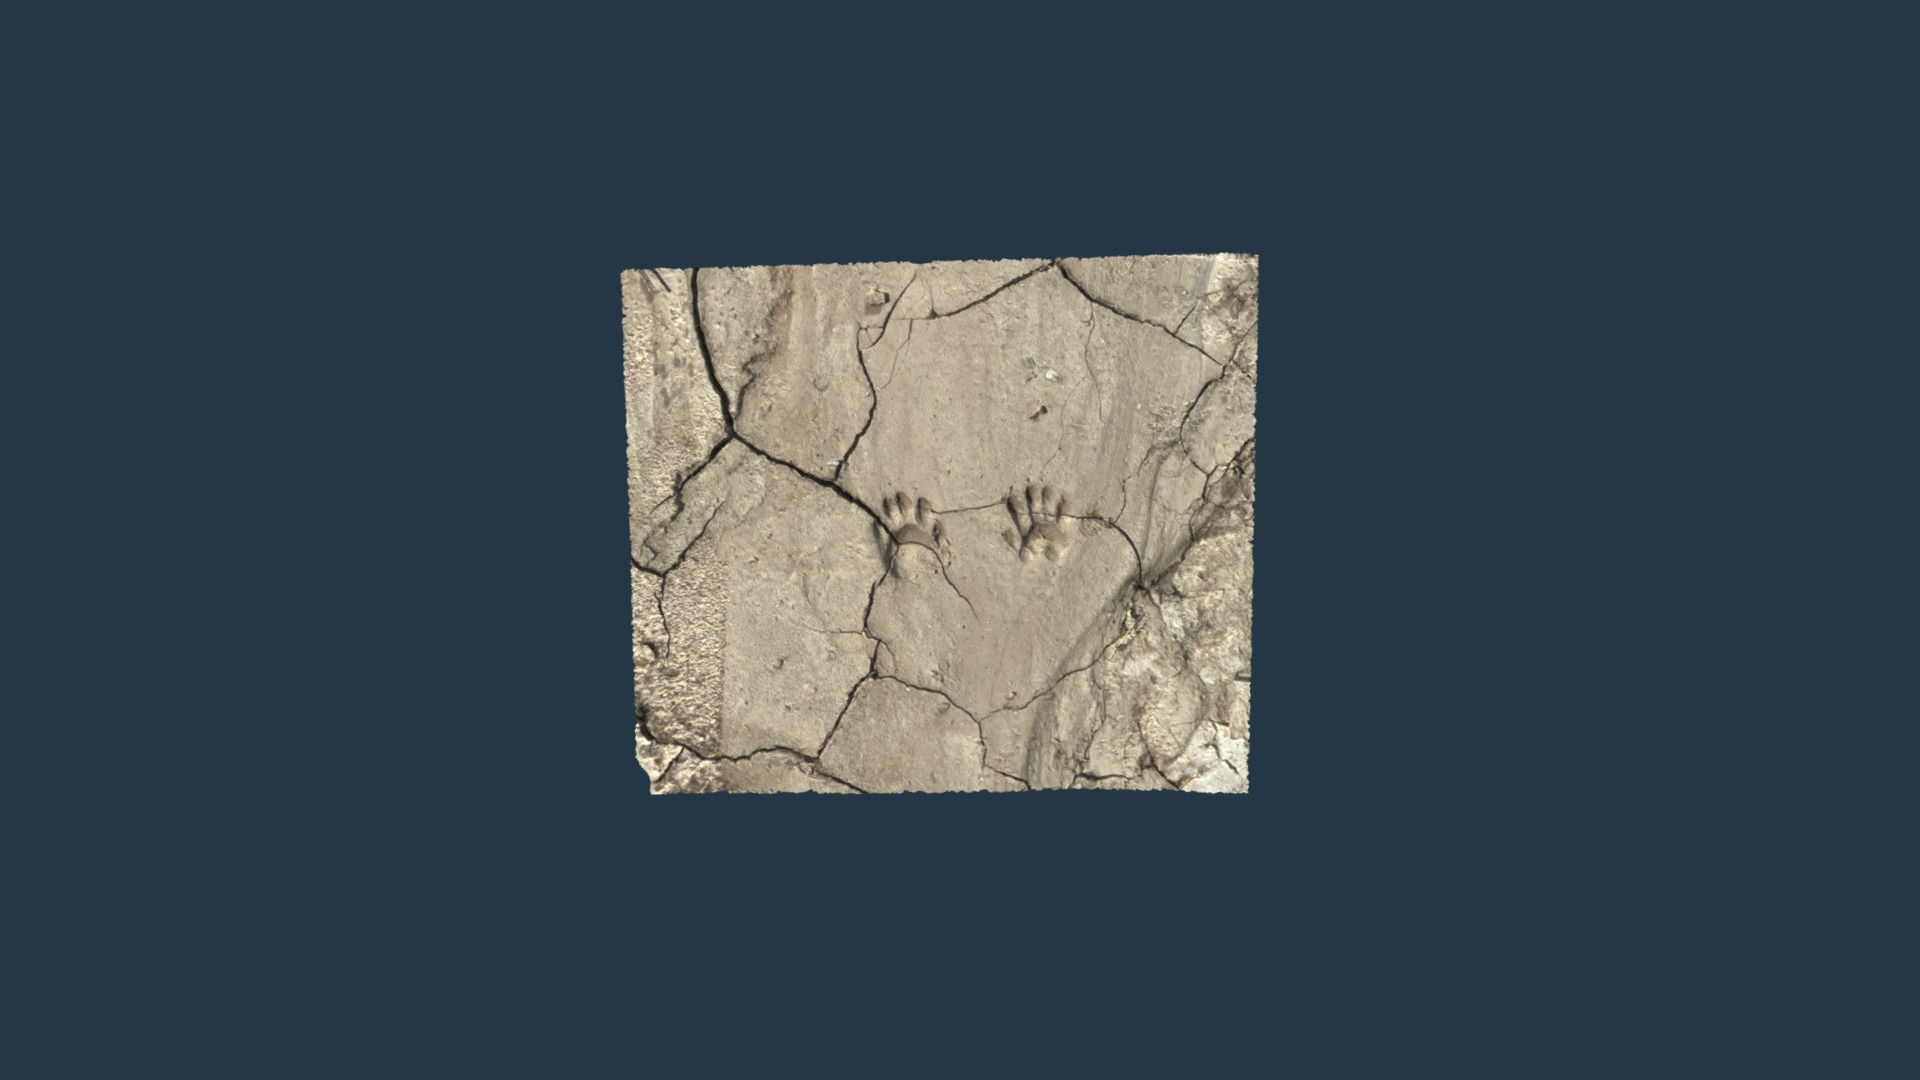 3D model Tracks – Picketwire, CO (extant) - This is a 3D model of the Tracks - Picketwire, CO (extant). The 3D model is about a rock with a face carved into it.